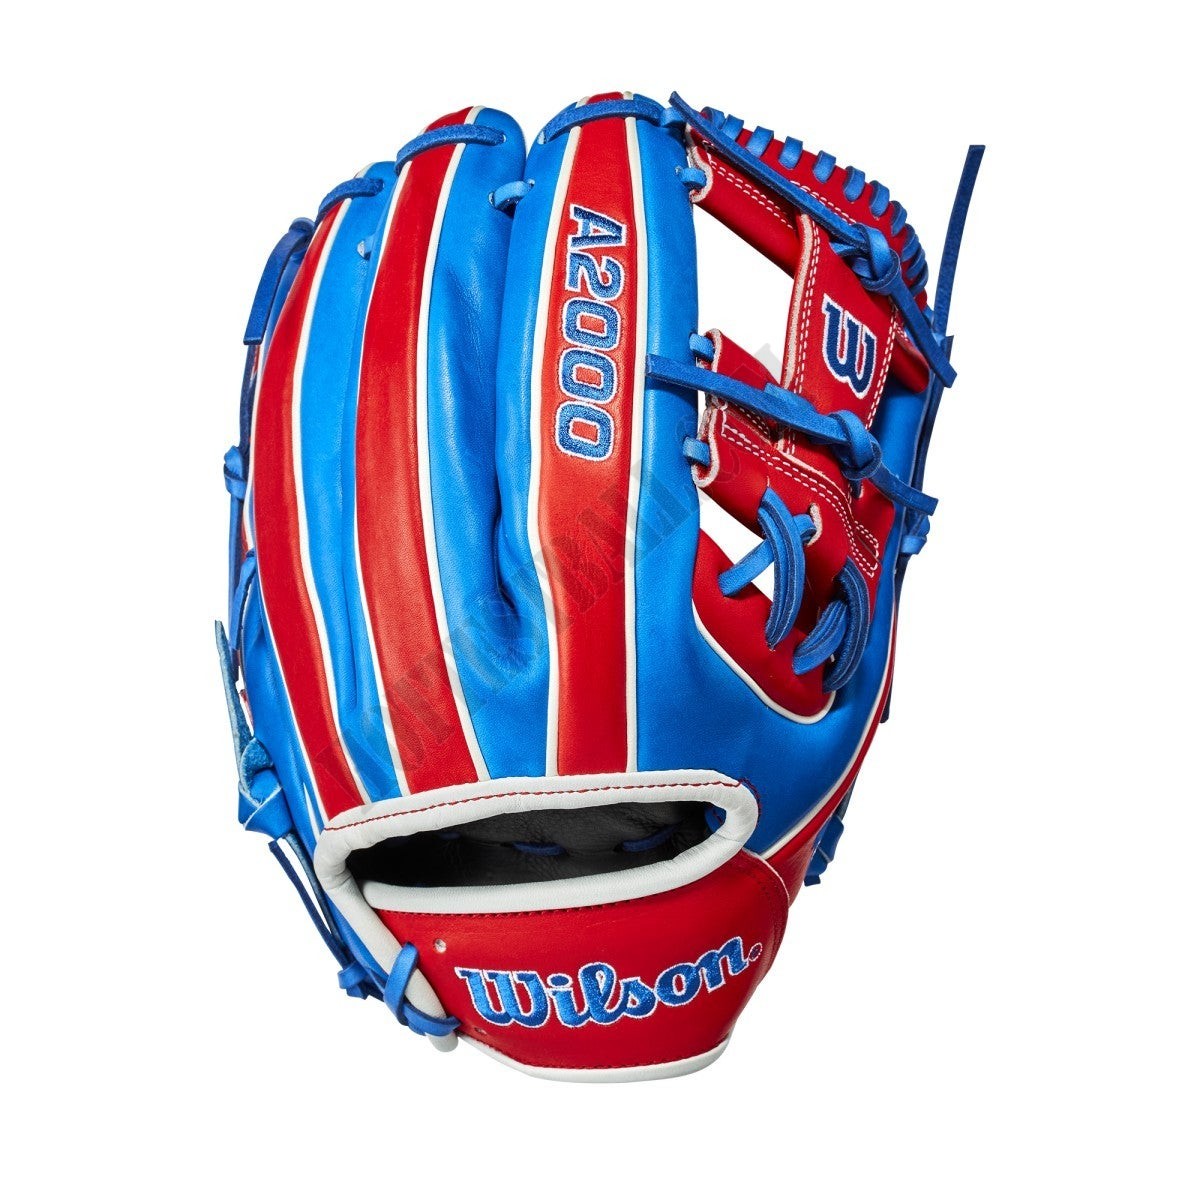 2021 A2000 1786 Puerto Rico 11.5" Infield Baseball Glove - Limited Edition ● Wilson Promotions - -1